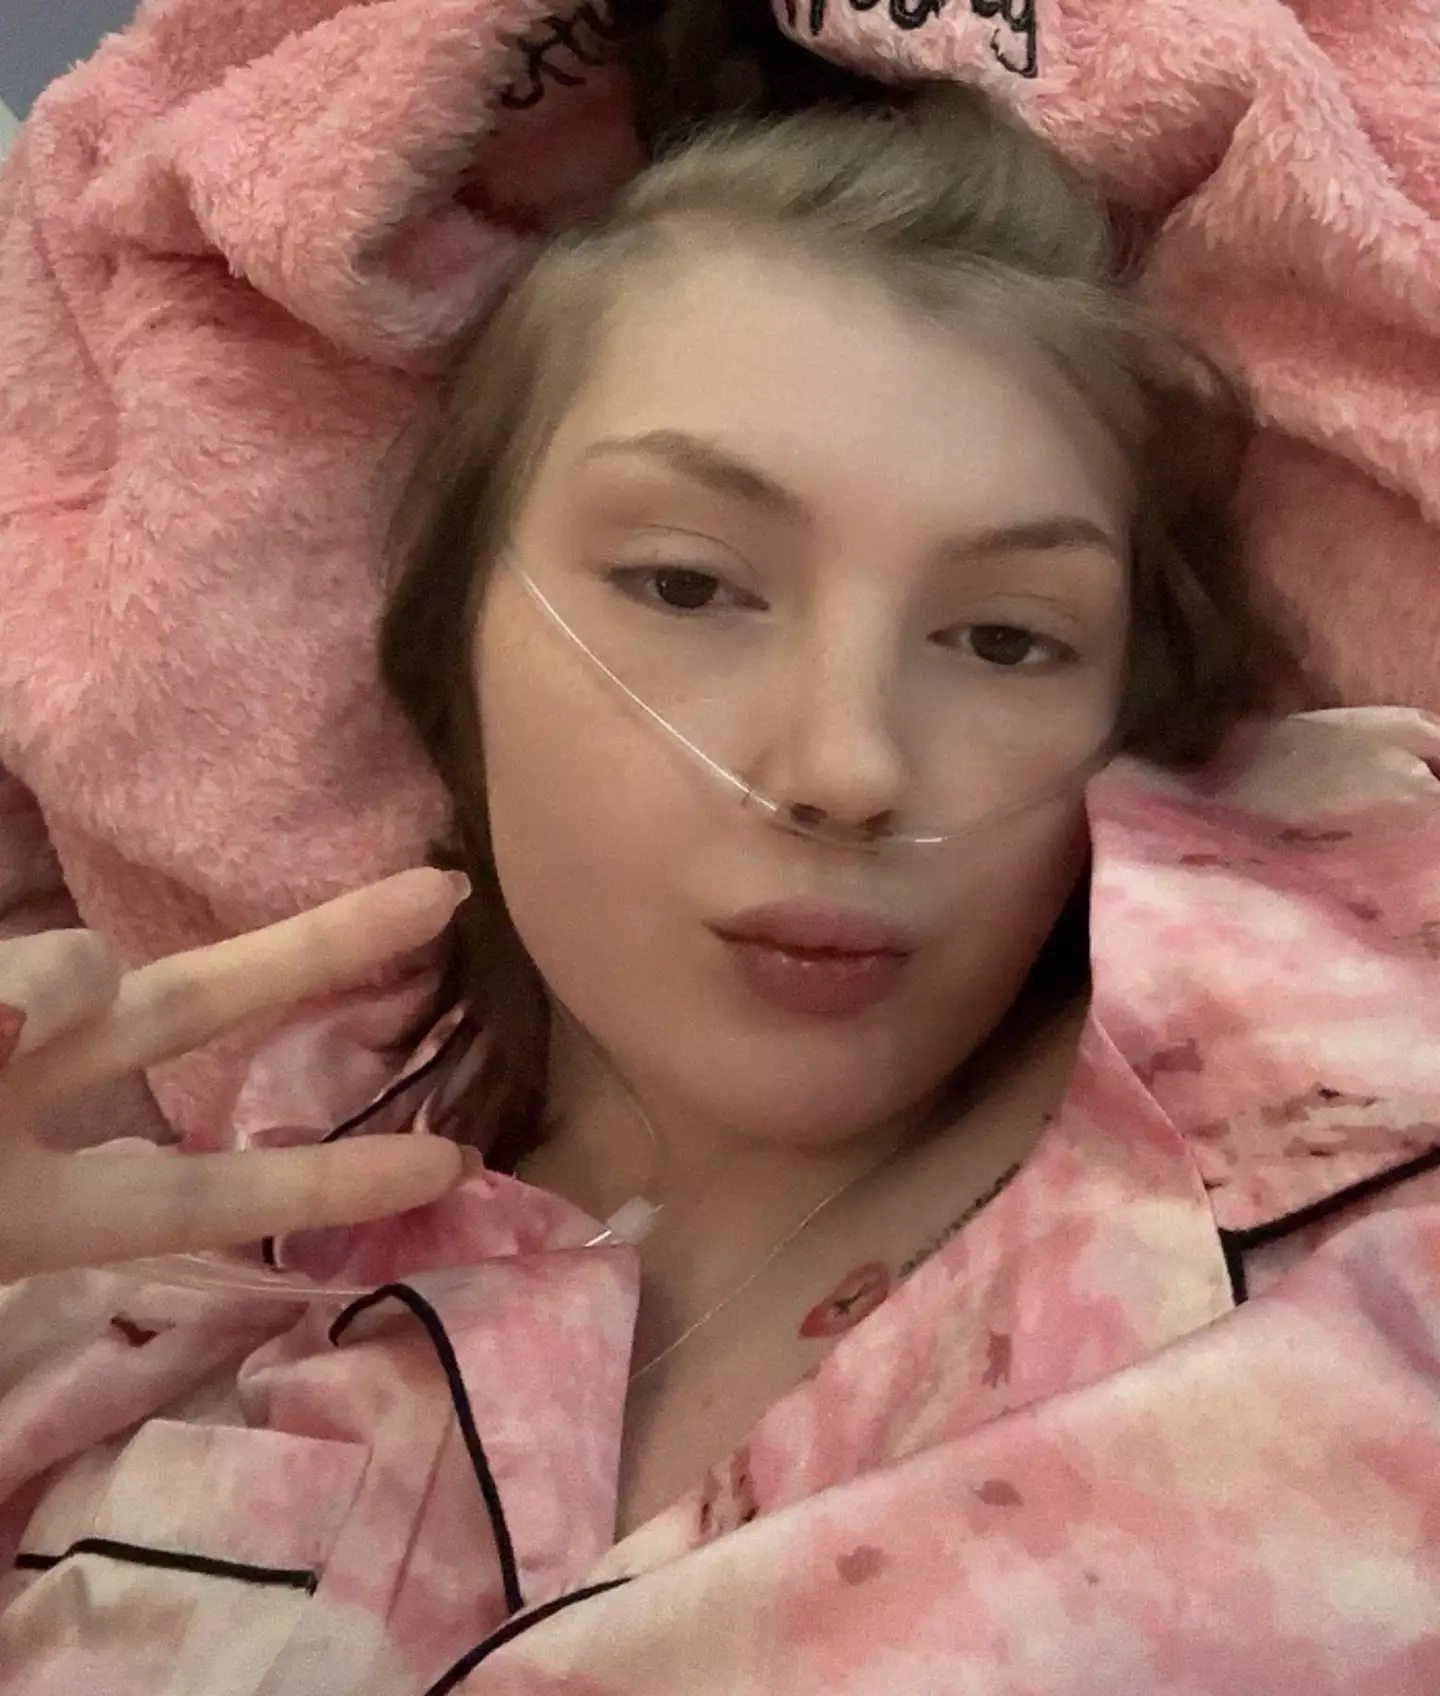 Leah Smith gave updates on her health to her thousands of followers on TikTok.